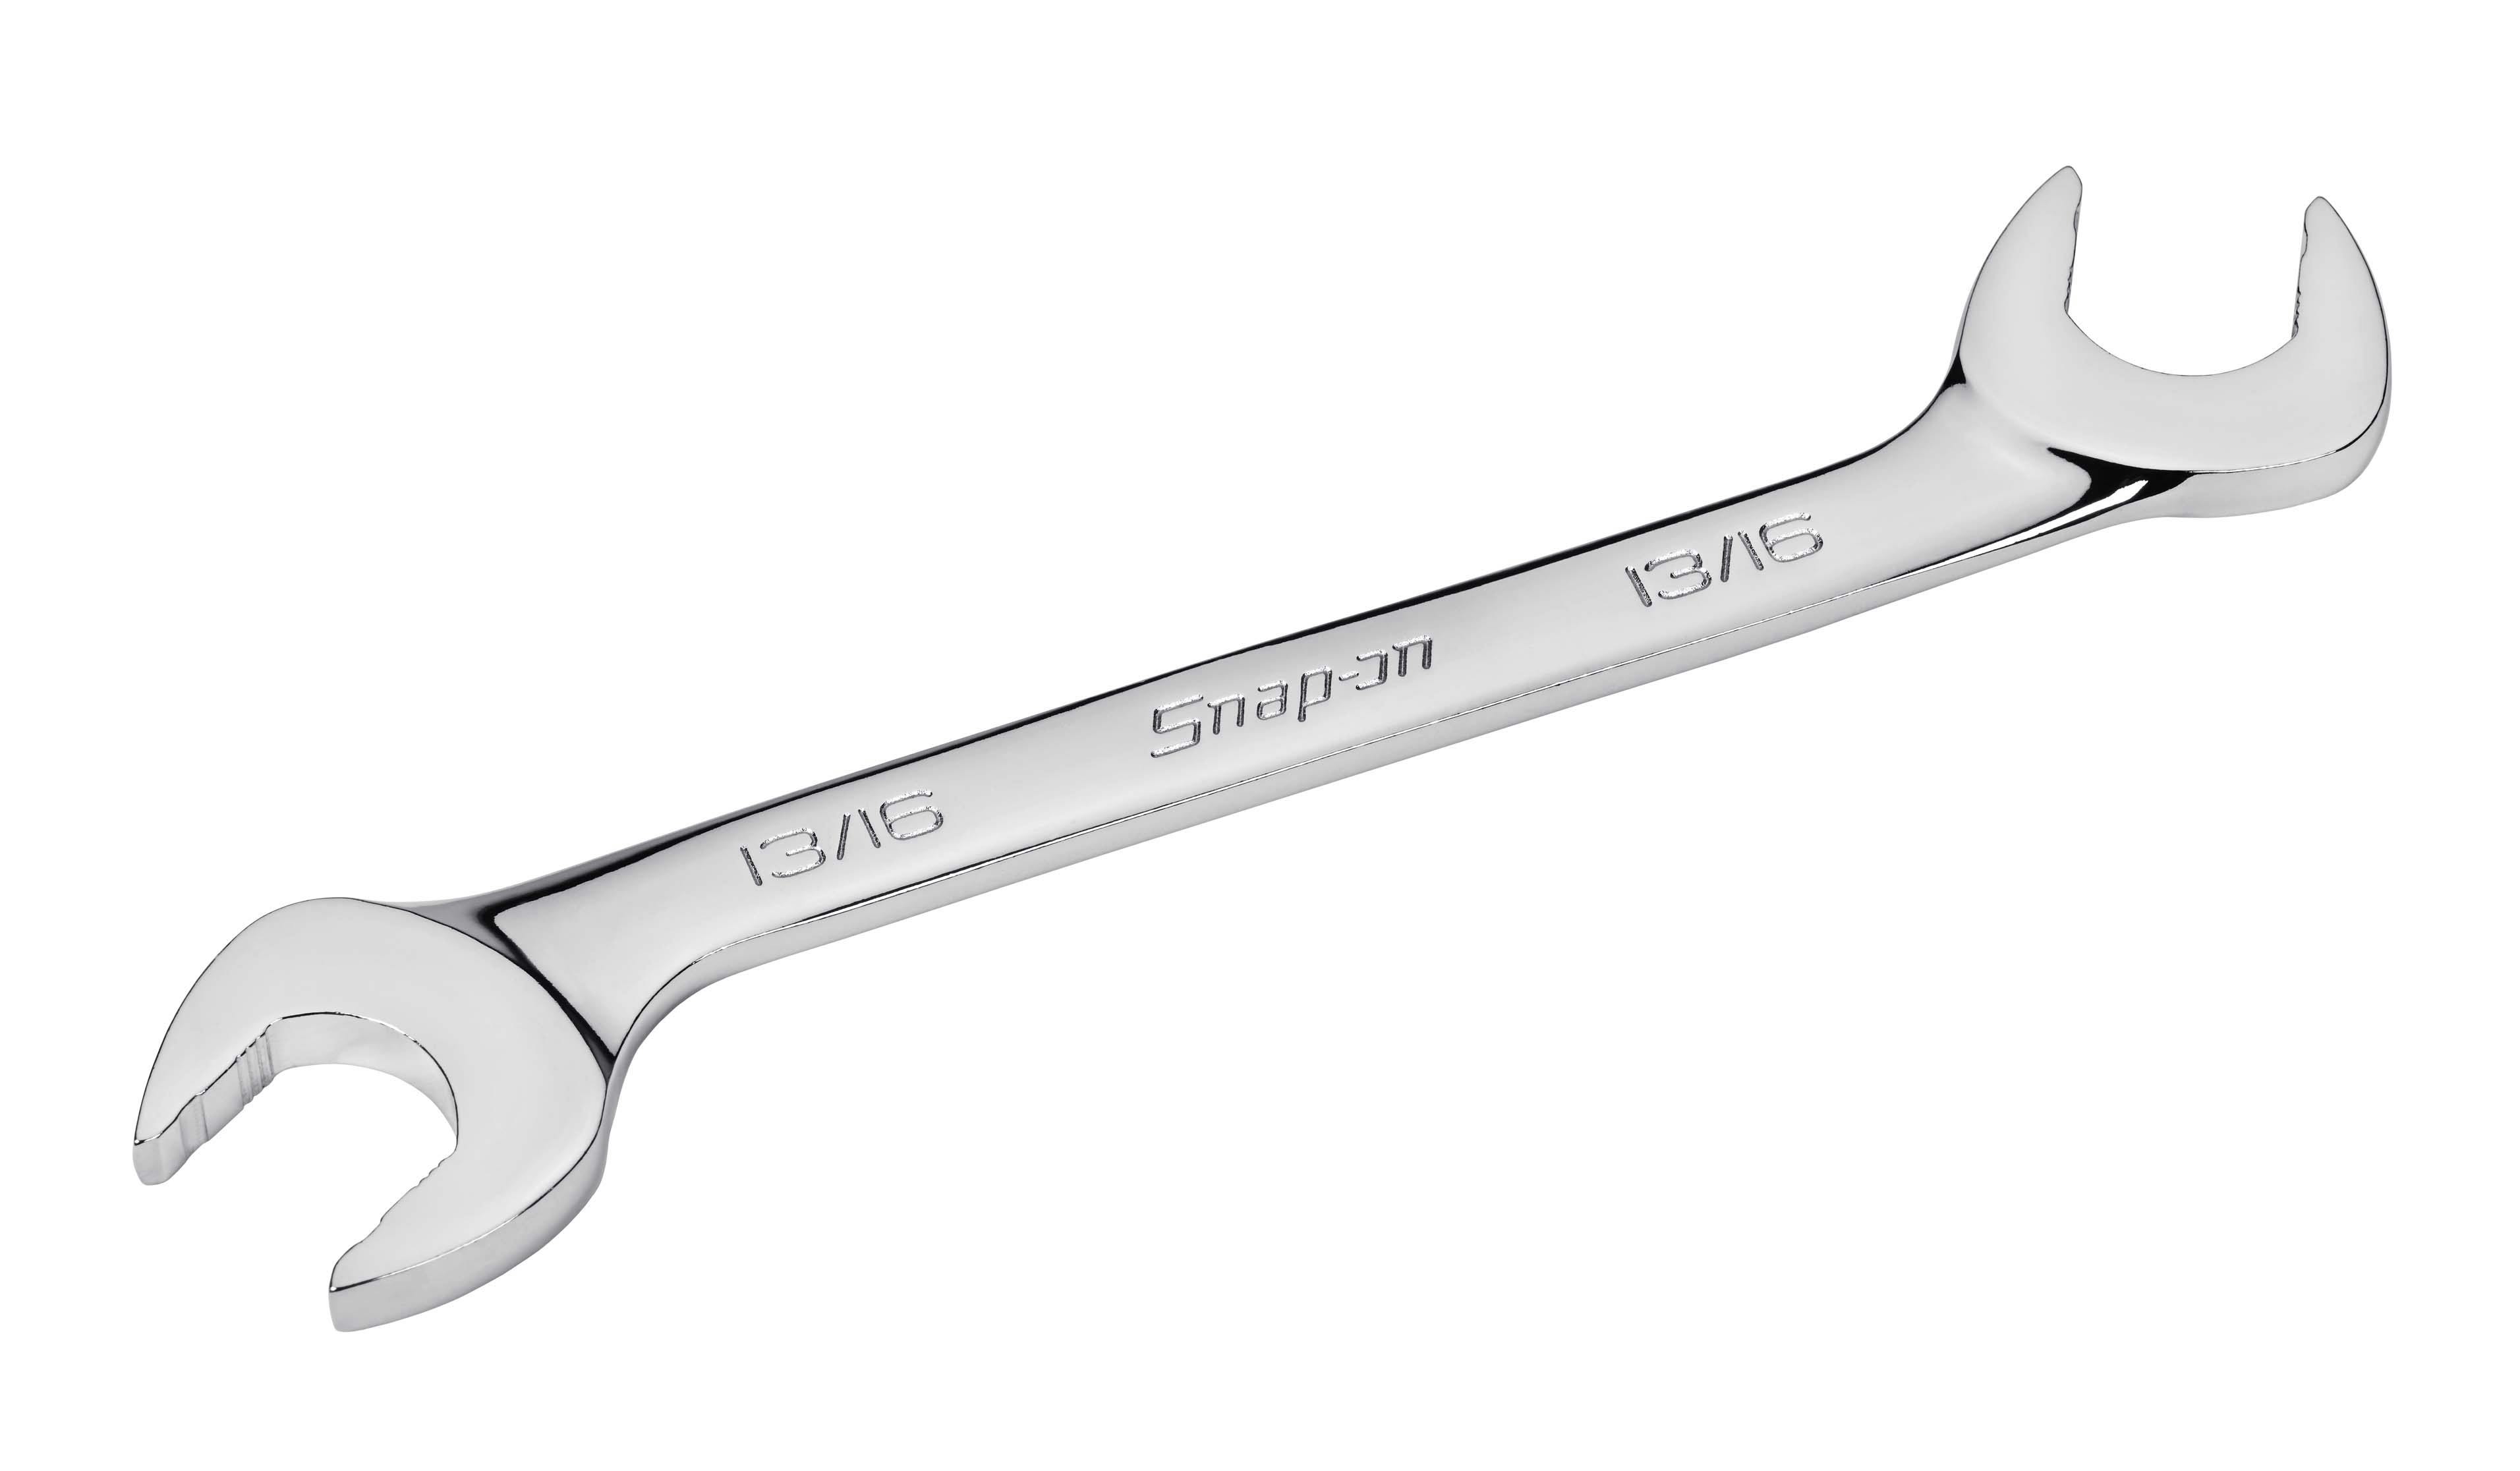 13/16 SAE Flank Drive® Plus Four-Way Angle Head Open-End Wrench, SVS26A